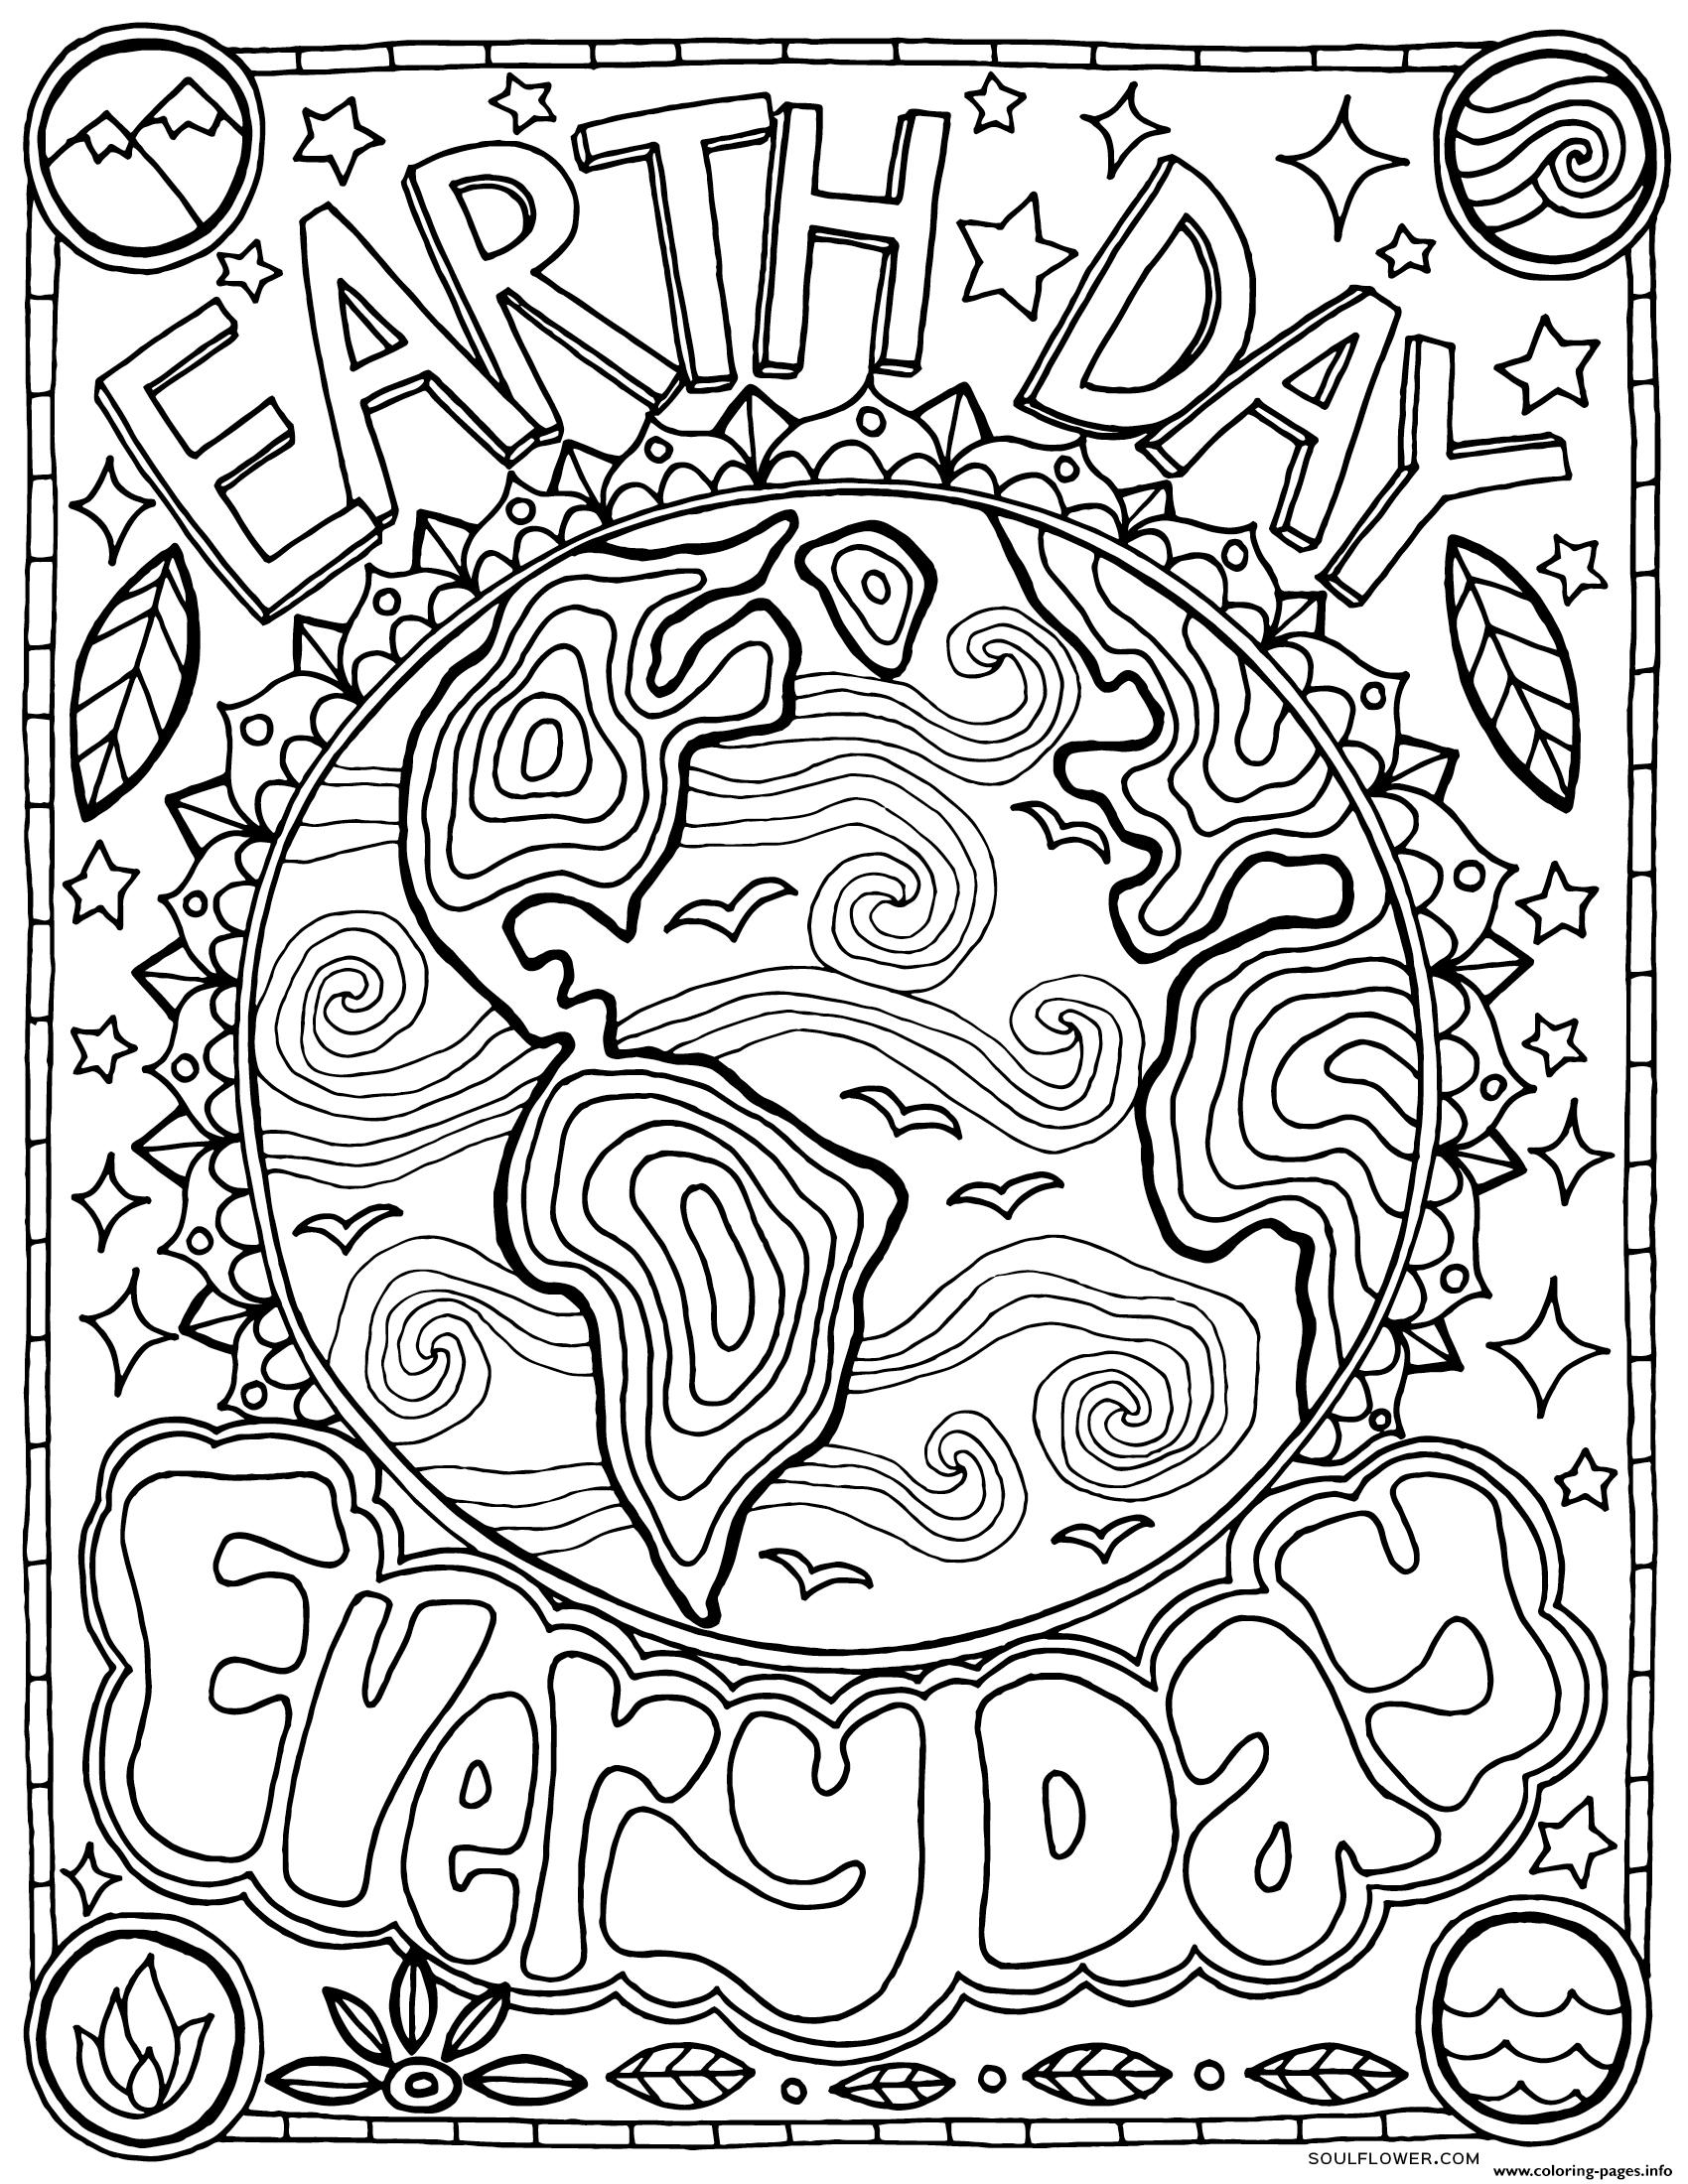 Earth Day Everyday Coloring Page Printable